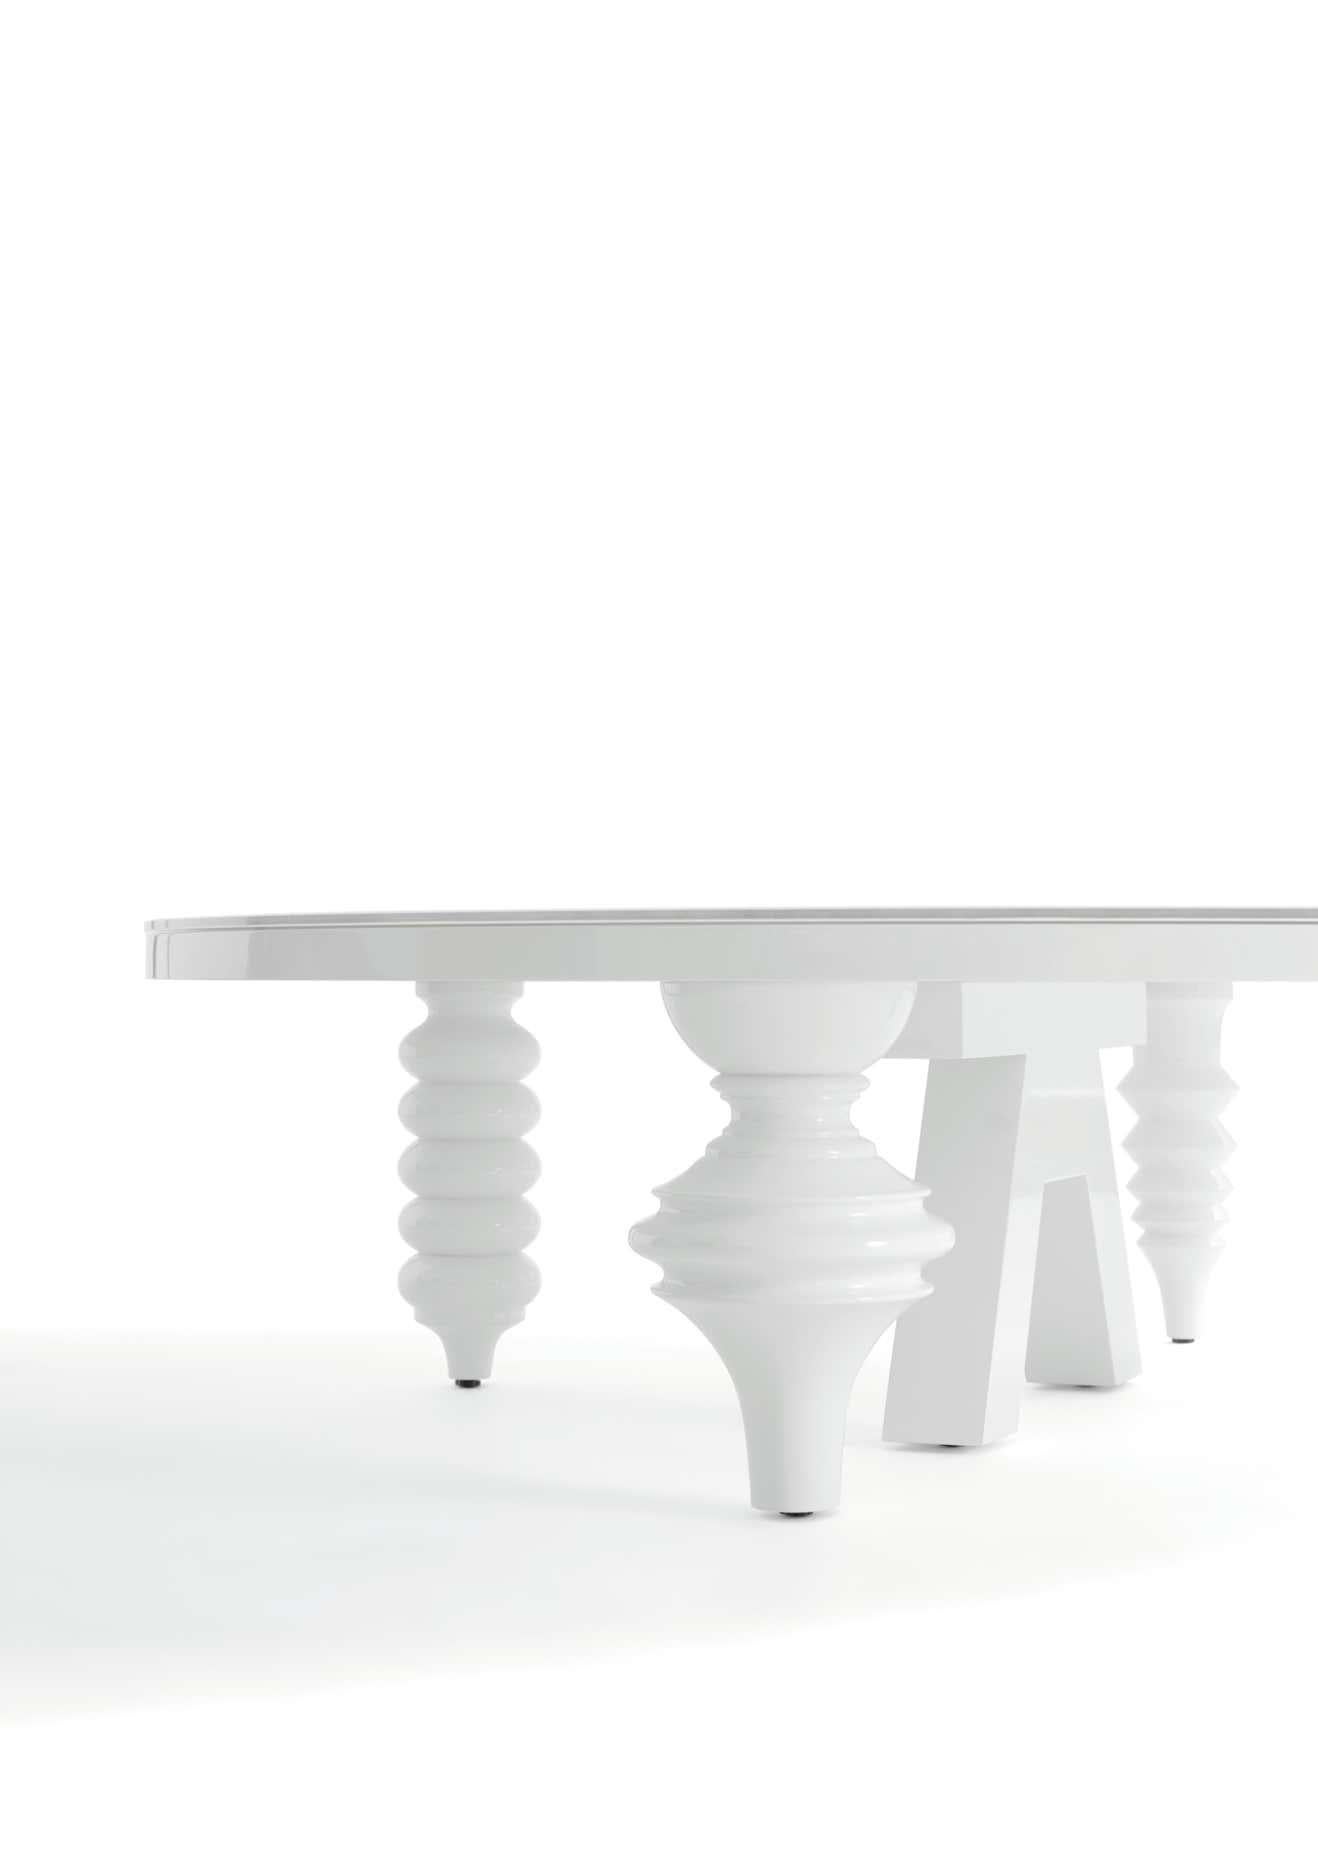 White Multileg Low Table High Gloss with Glass Top

Materials: 
MDF, lacquer, glass

Dimensions: 
Diam. 120 cm x H 35 cm

The Multileg Table came about in an obvious way, springing from the Multileg Cabinet. Using the same legs, Jaime